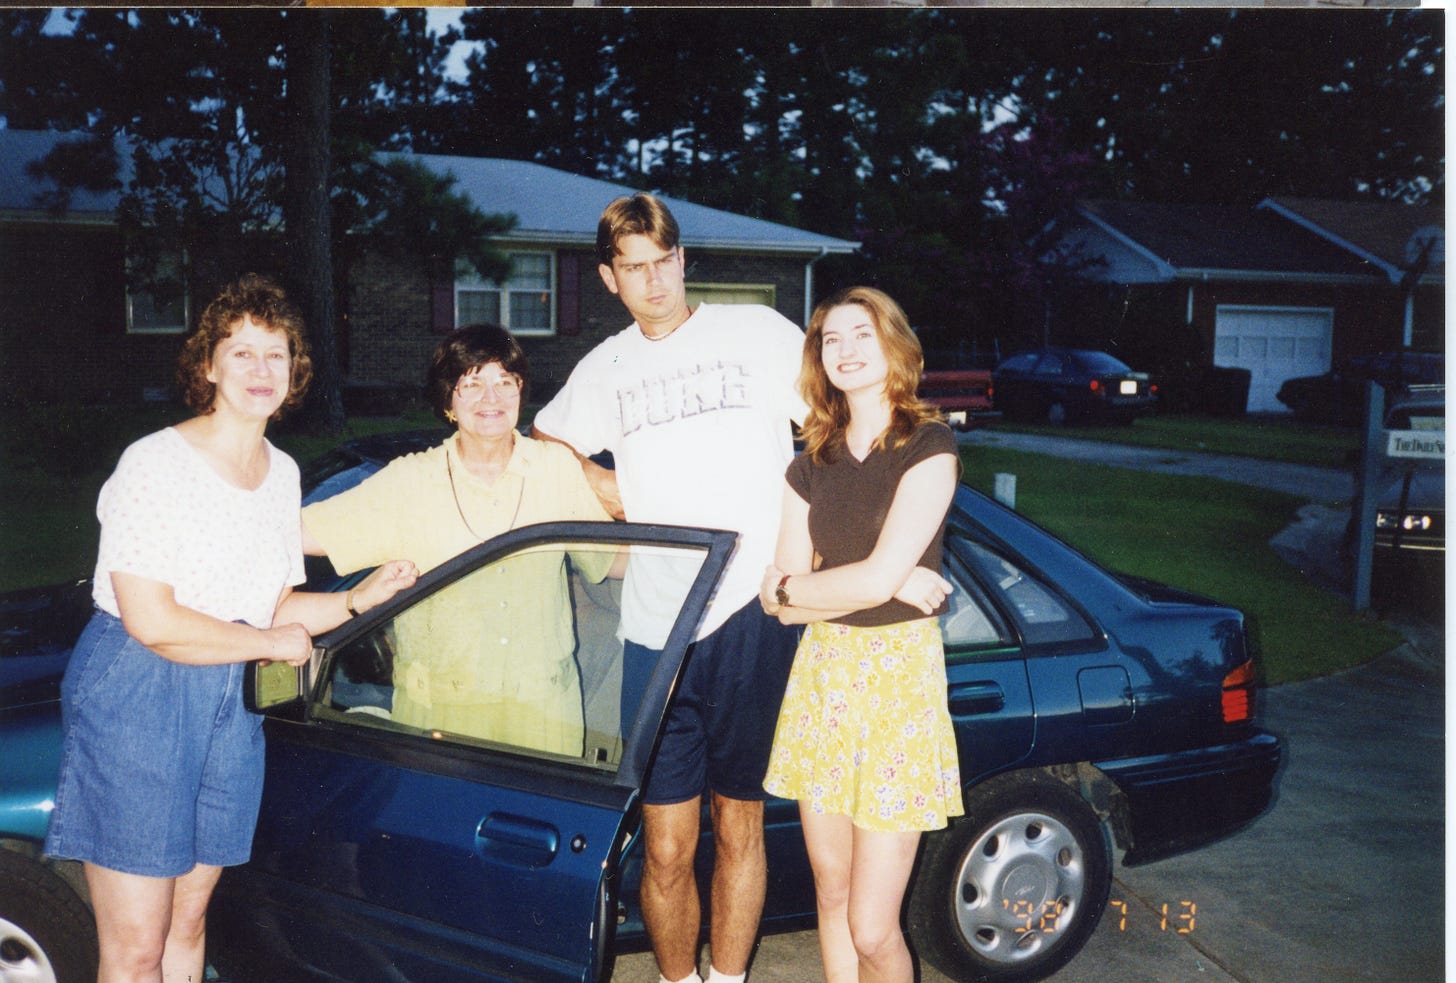 Four white people, two older women, a tall young man, and a young woman next to a car in the suburbs. Date on photo is July 13, 1998.